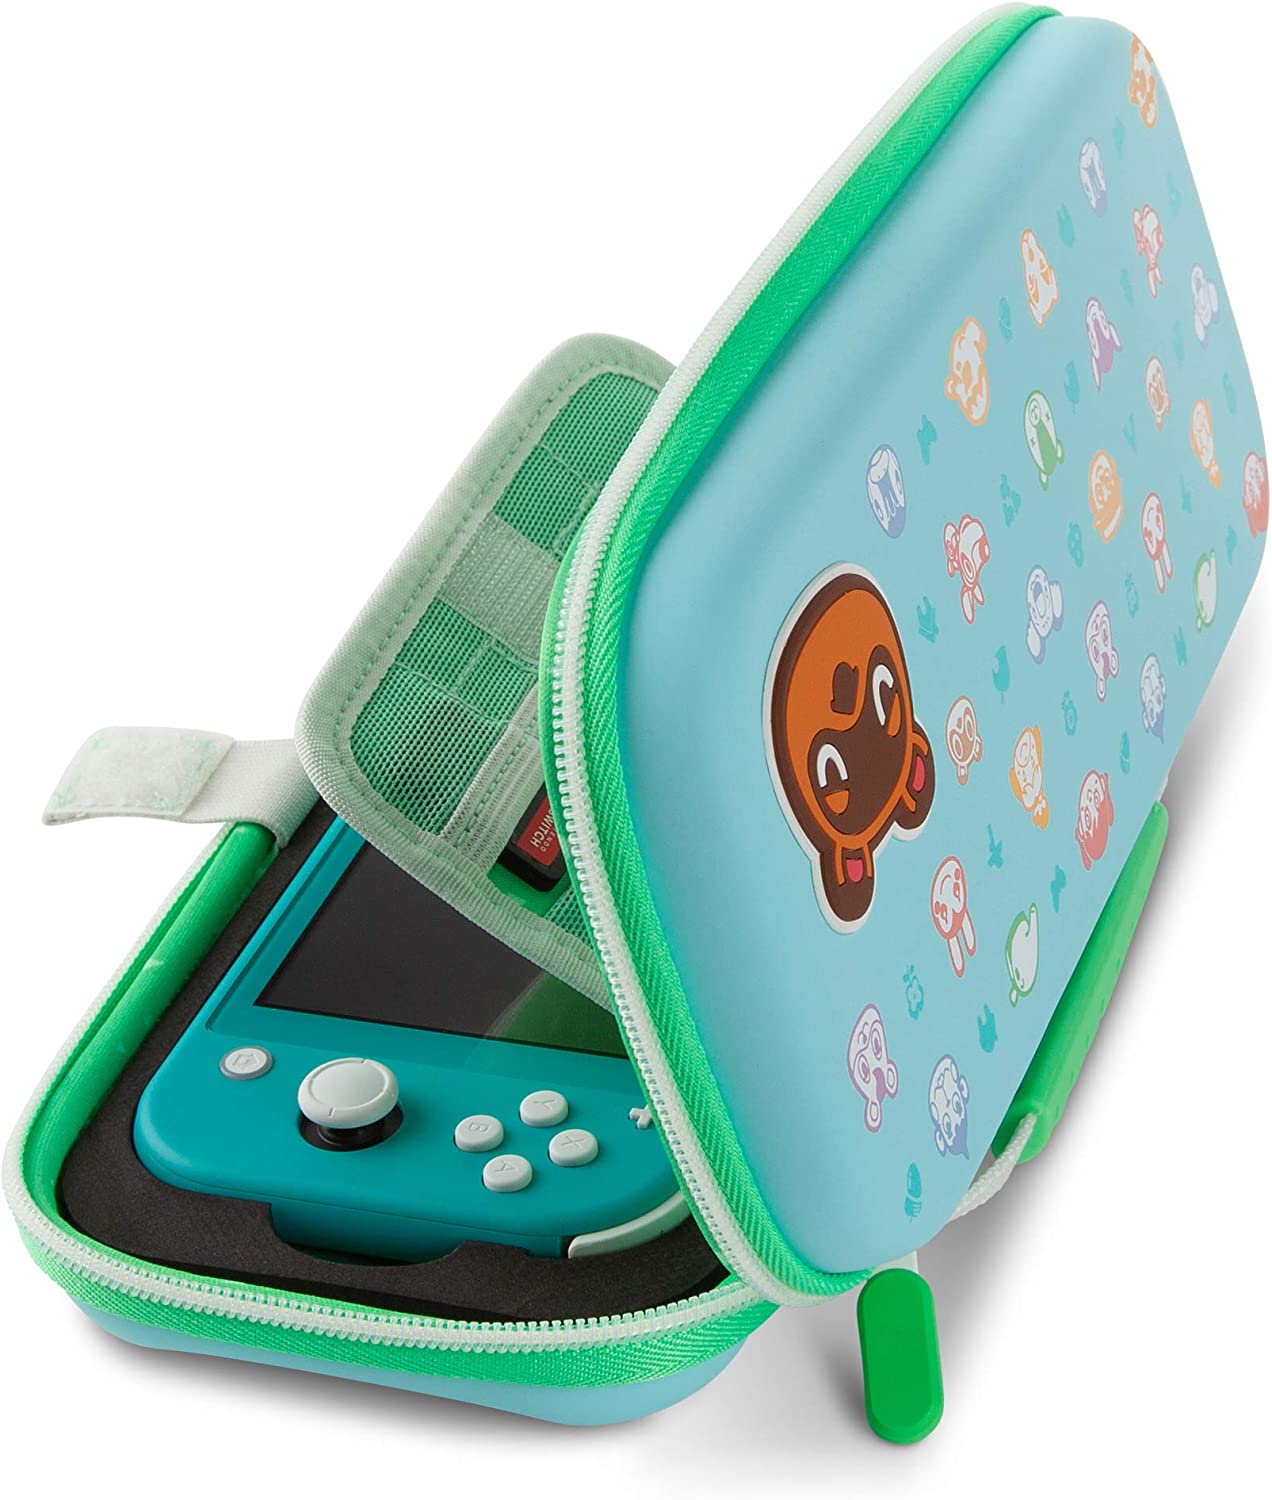 PowerA Protection Case for Nintendo Switch - Animal Crossing